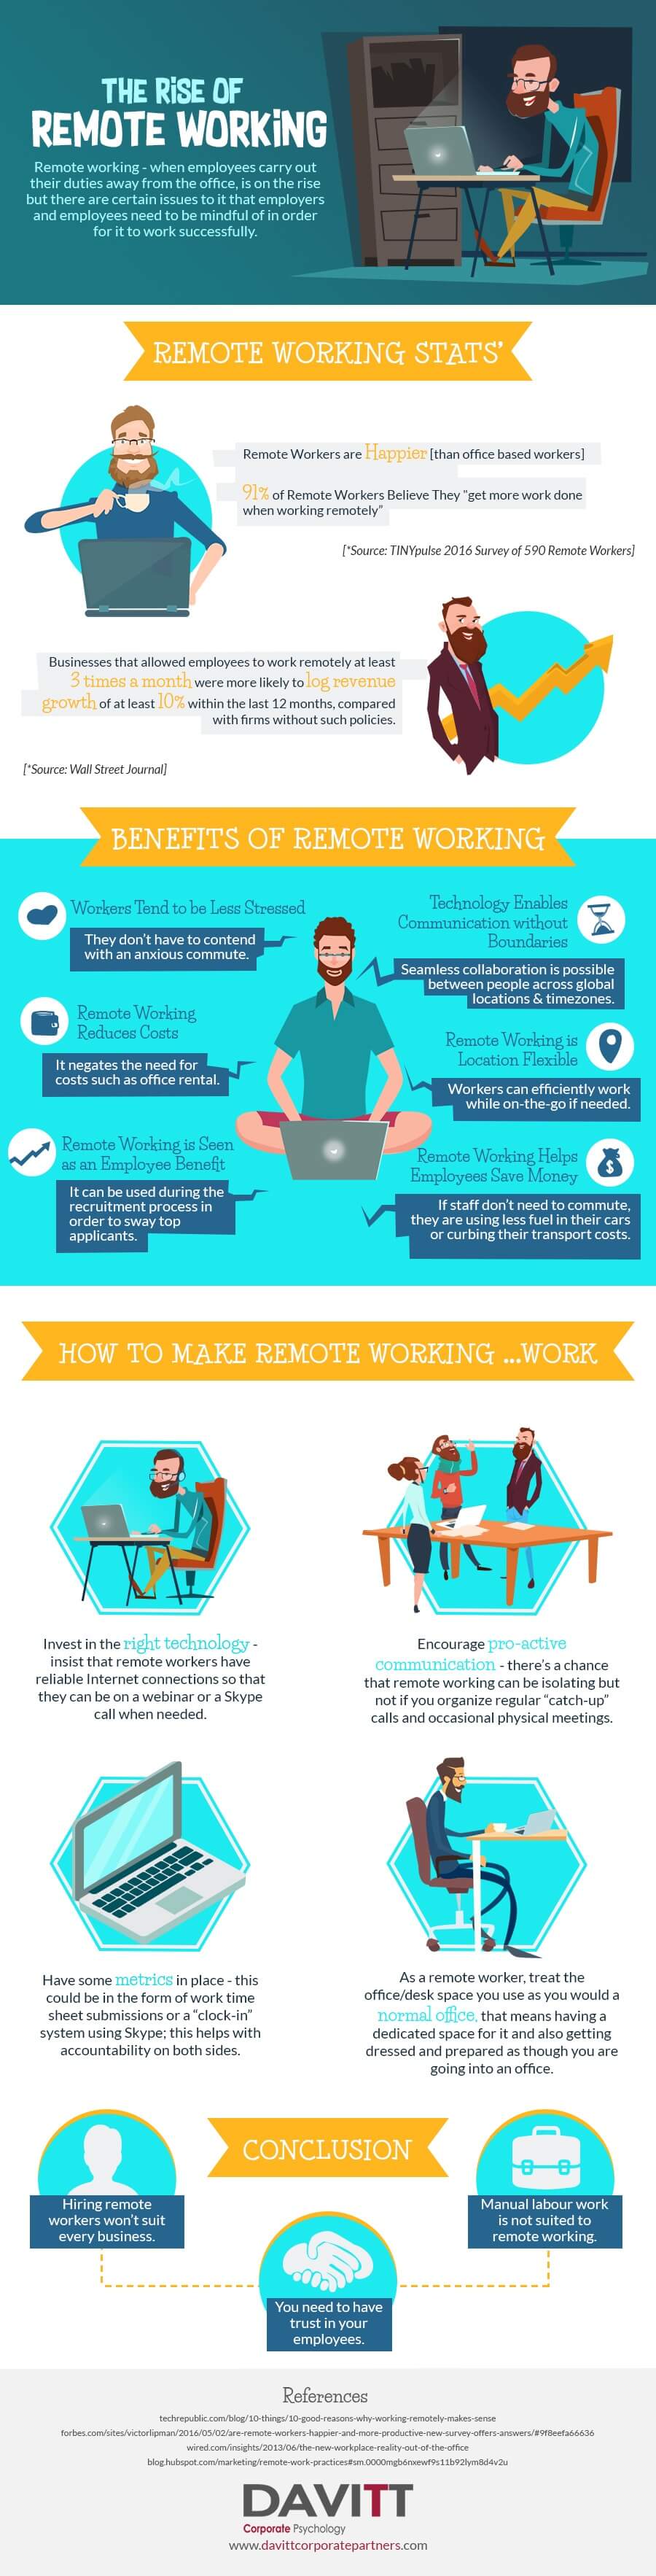 Why-Remote-Working-Is-On-The-Rise-Infographic.jpg